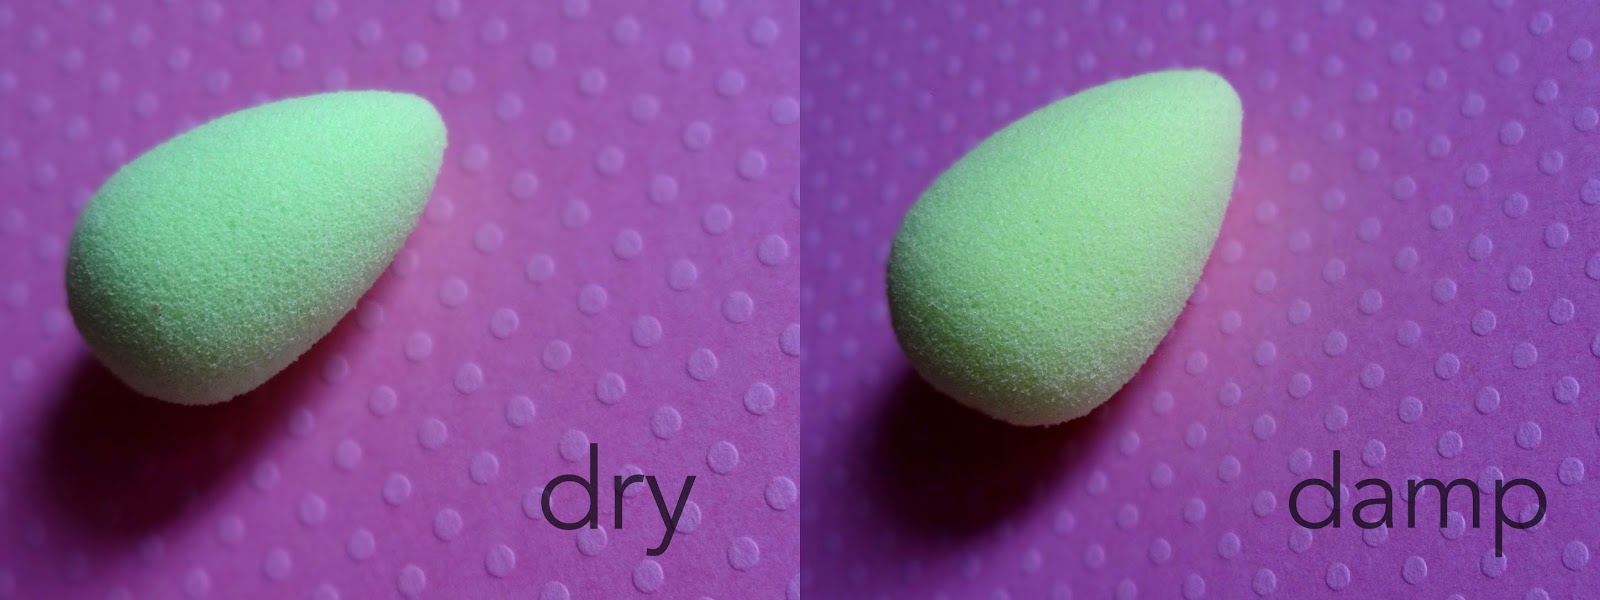 beautyblender micro.mini makeup sponge wet and dry review, photos